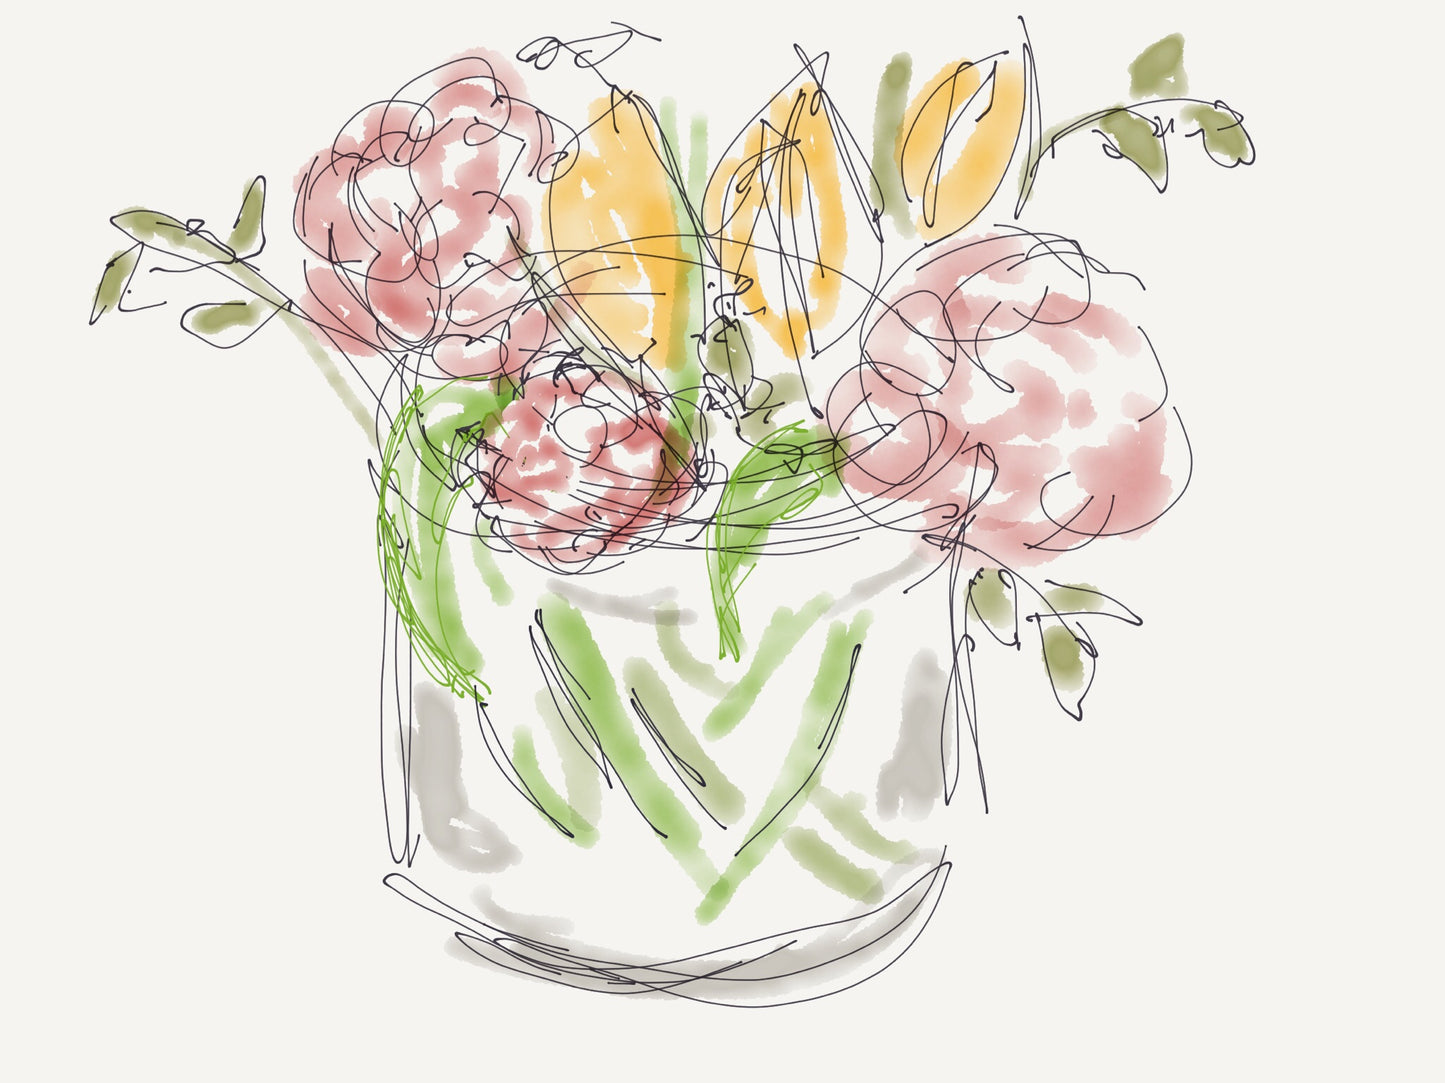 Flowers with tulips in a jar